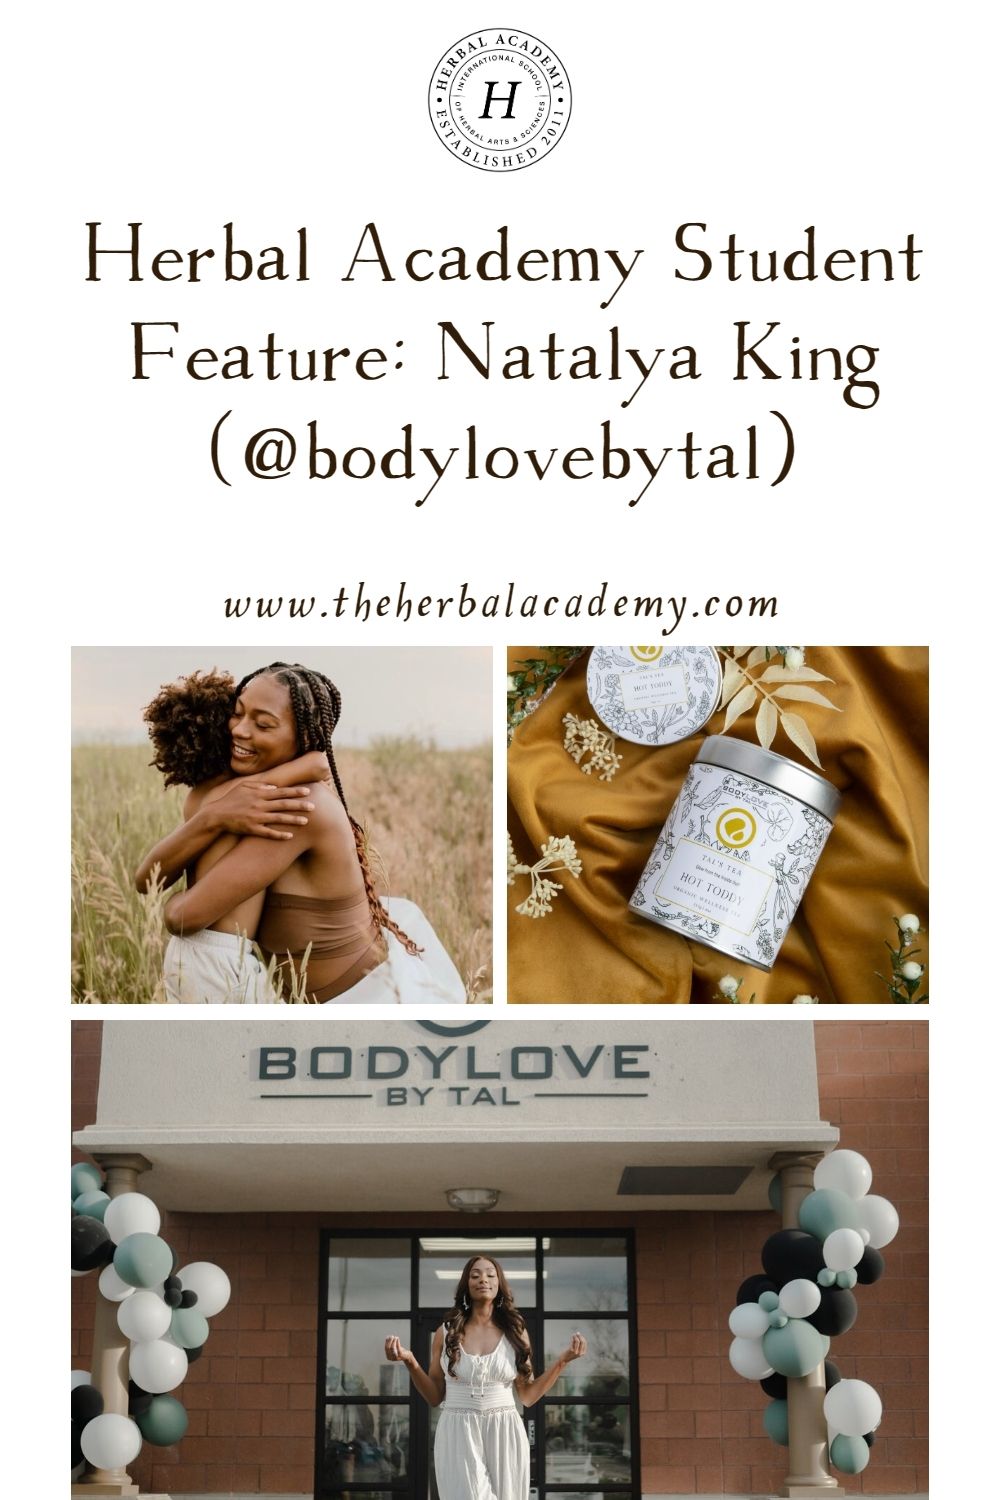 Herbal Academy Student Feature: Natalya King (@bodylovebytal) | Herbal Academy | We interviewed Natalya King, owner of BodyLove by Tal in Parker, Colorado. BodyLove by Tal is a flourishing herbal and skincare brand.